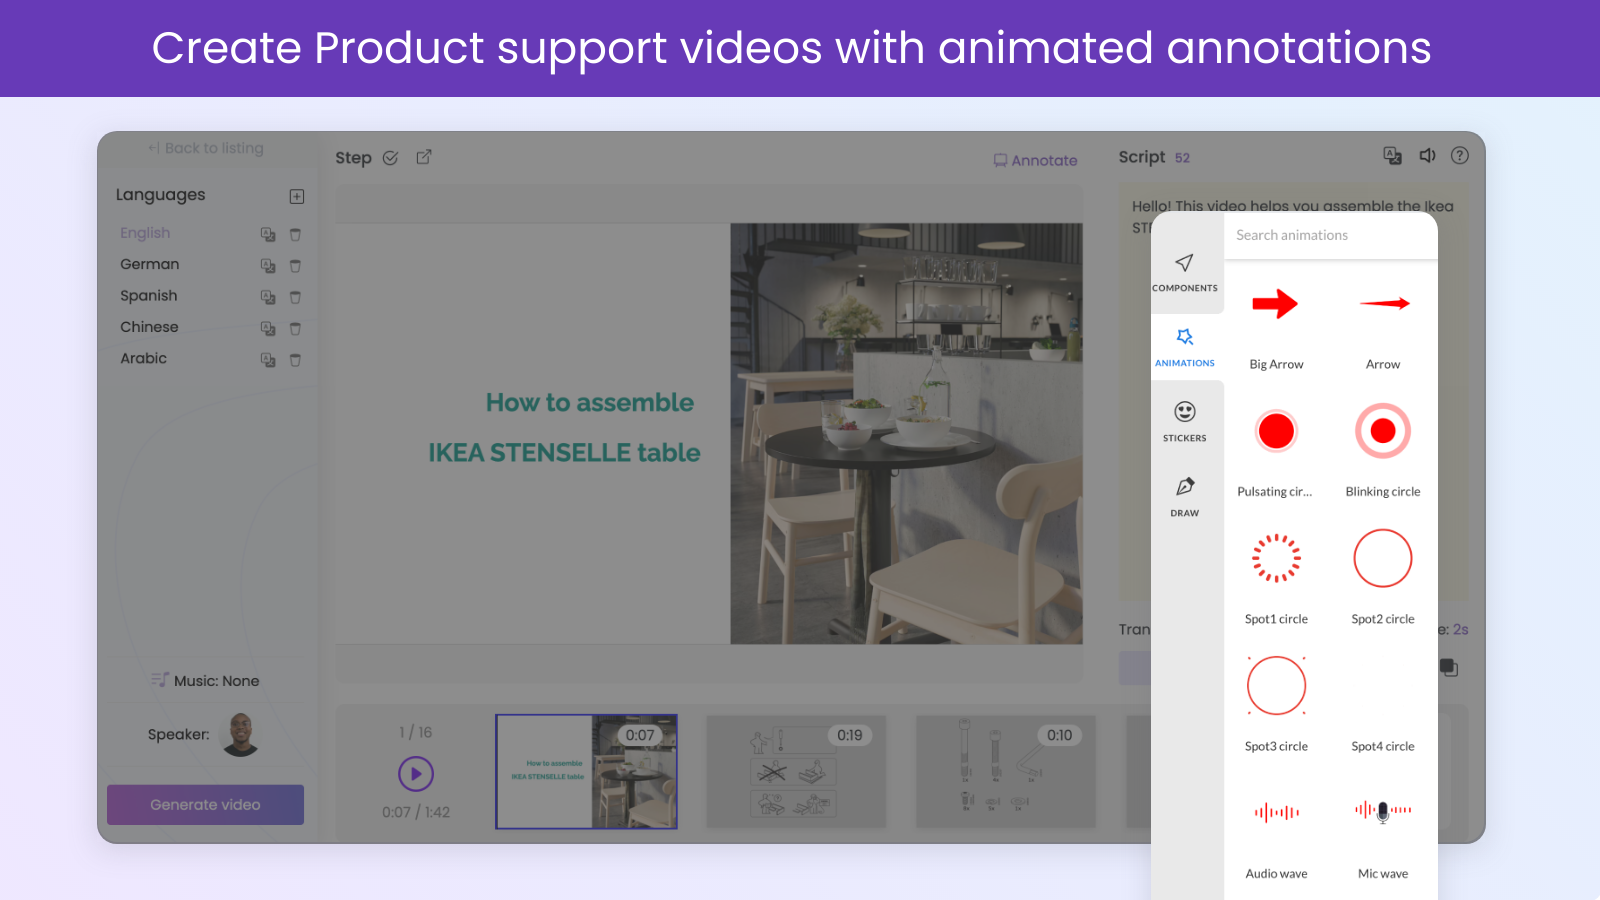 Create Product support videos with animated annotations